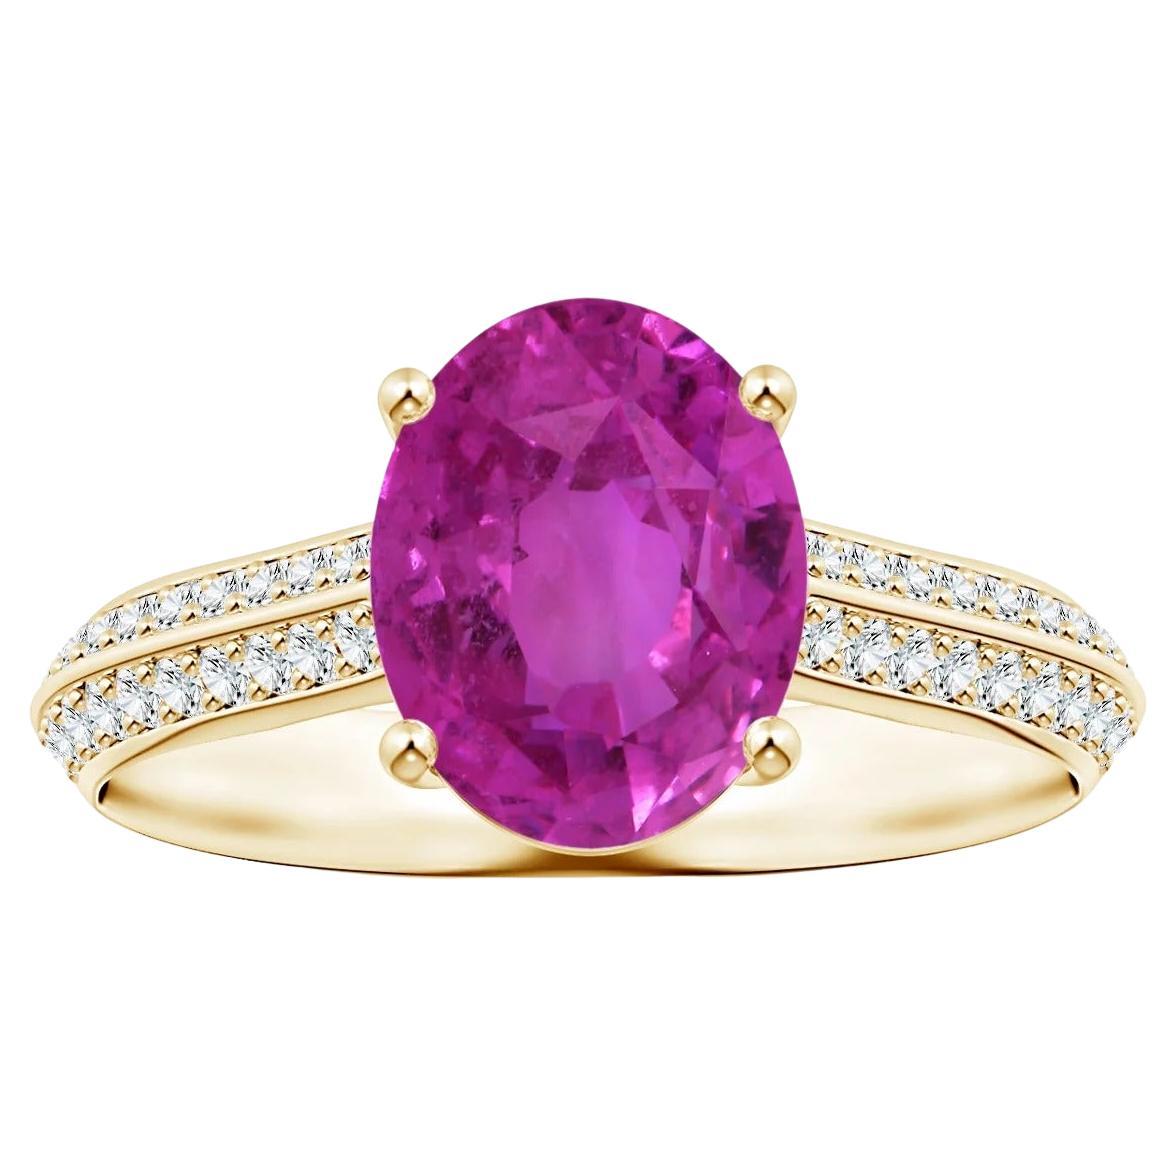 ANGARA GIA Certified Pink Sapphire Knife Edge Ring in Yellow Gold with Diamonds